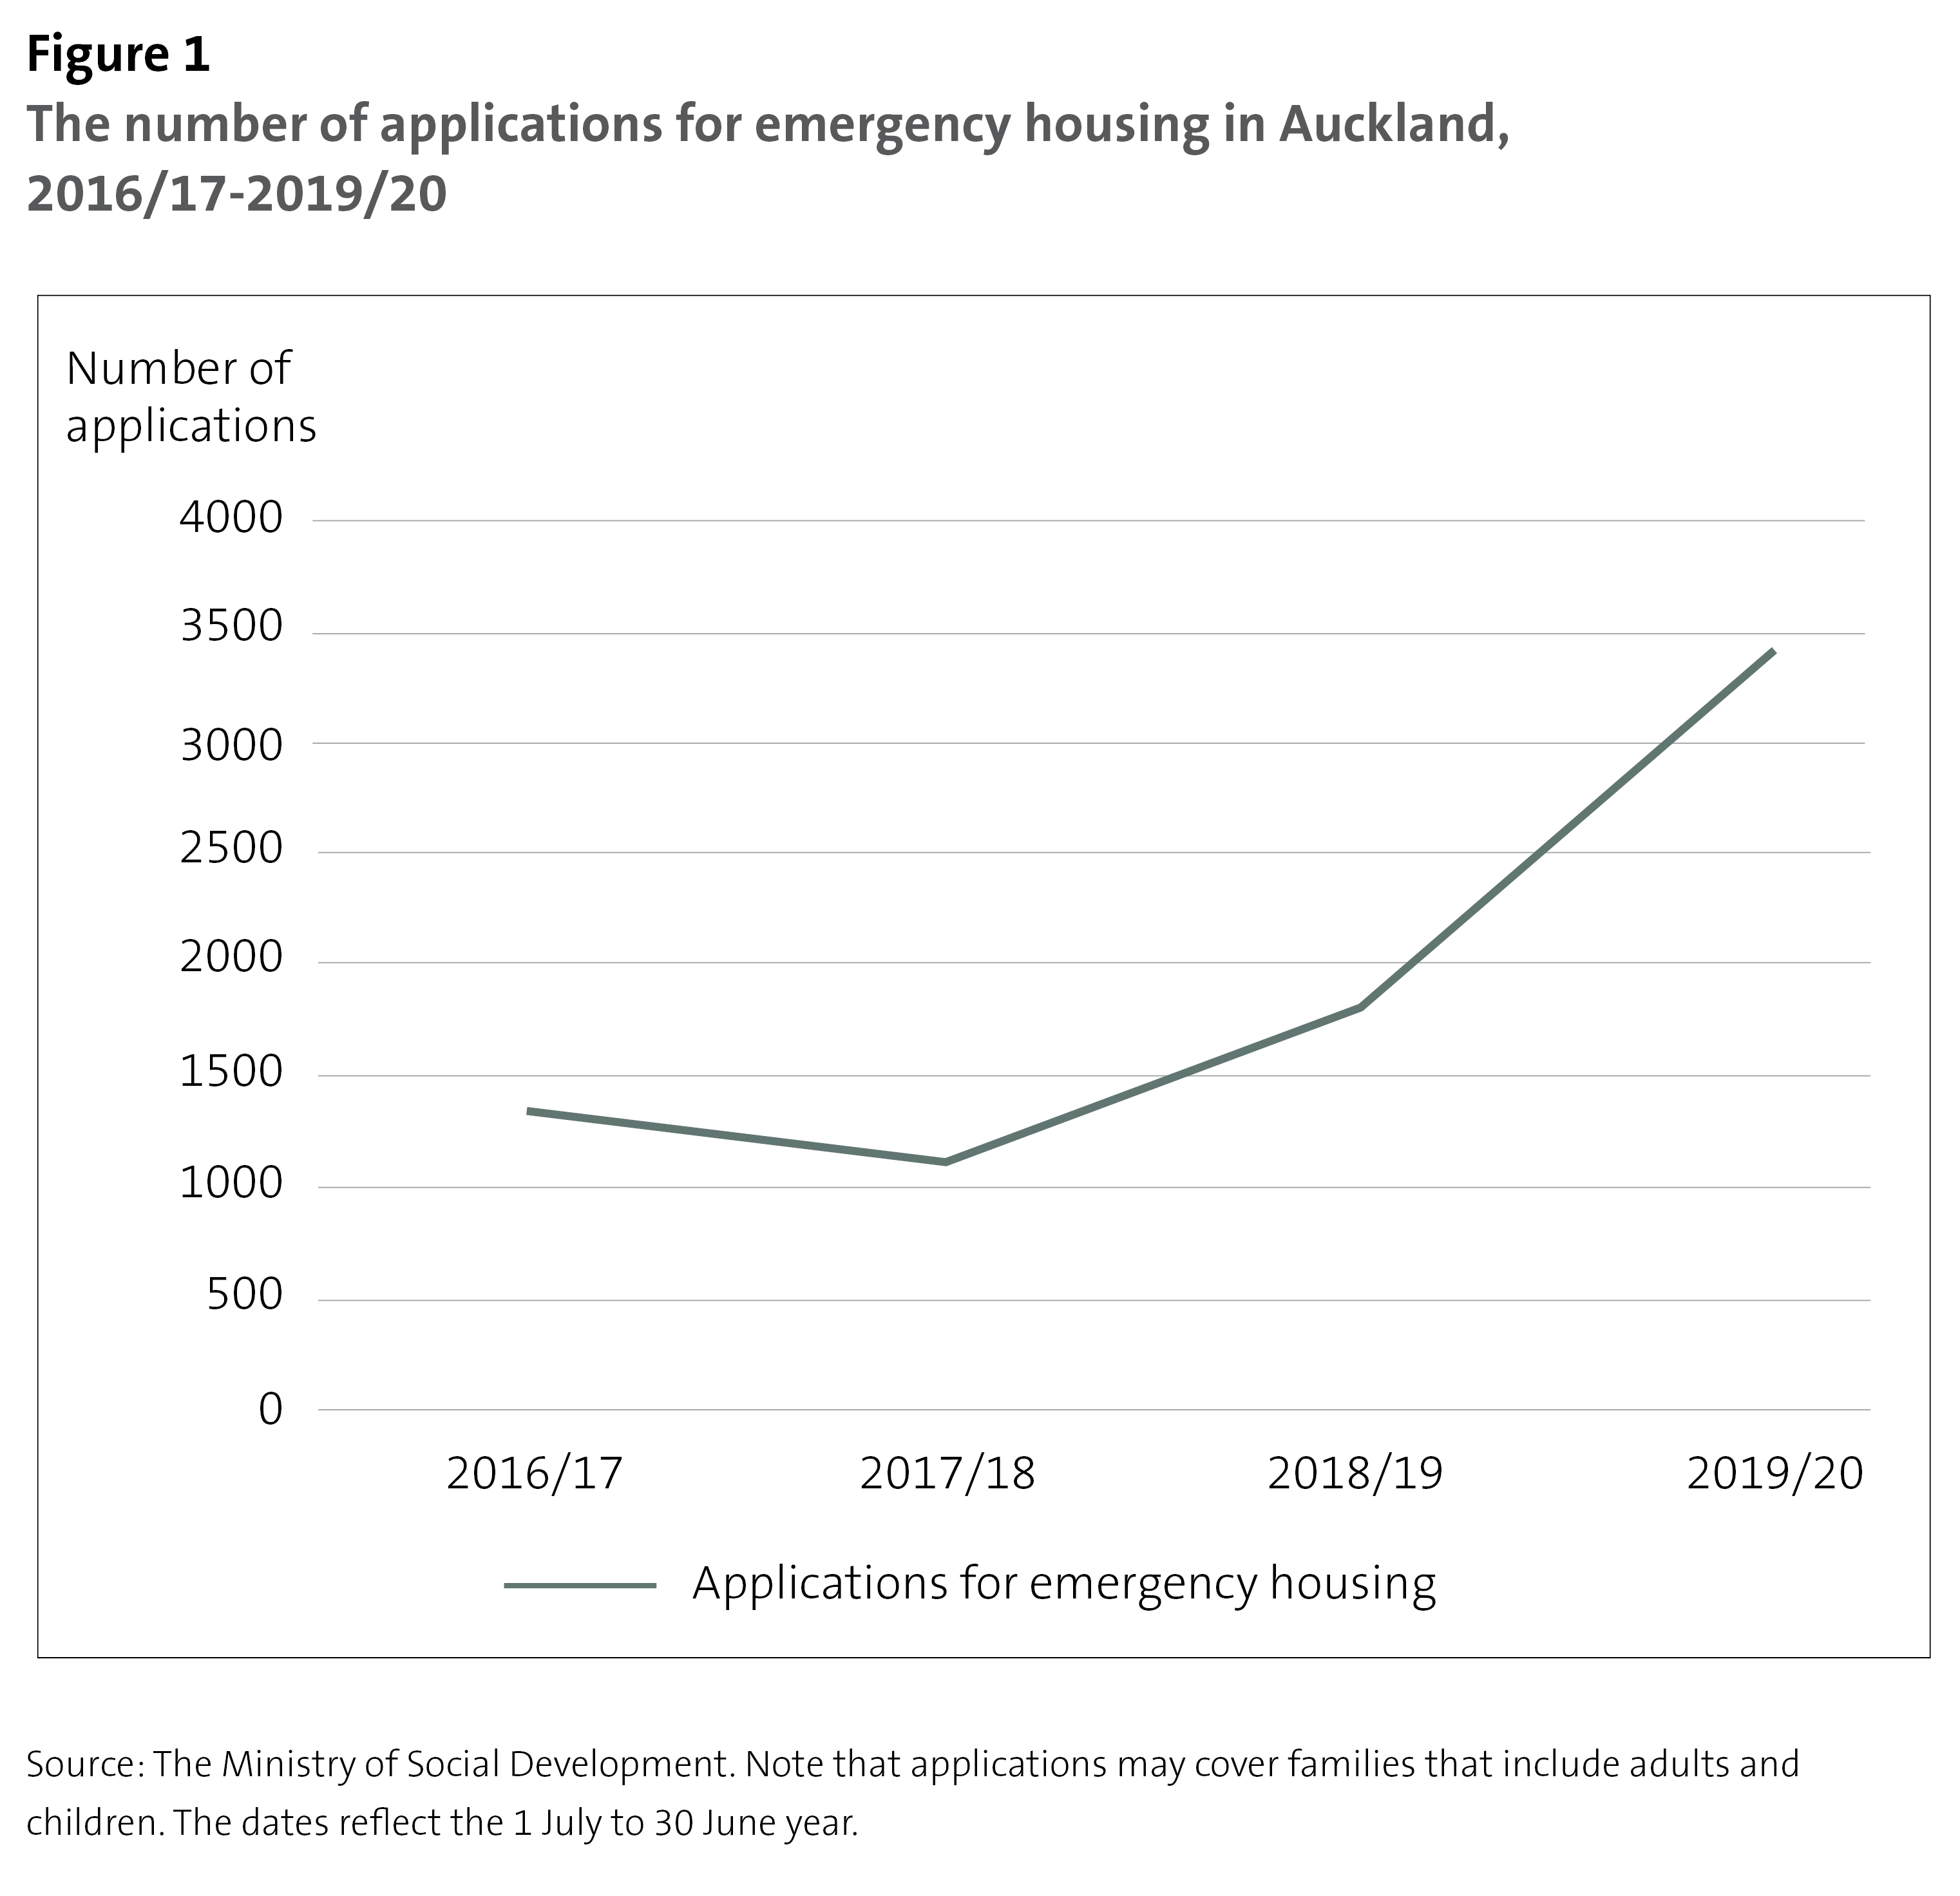 Figure 1 - The number of applications for emergency housing in Auckland, 2016/17-2019/20